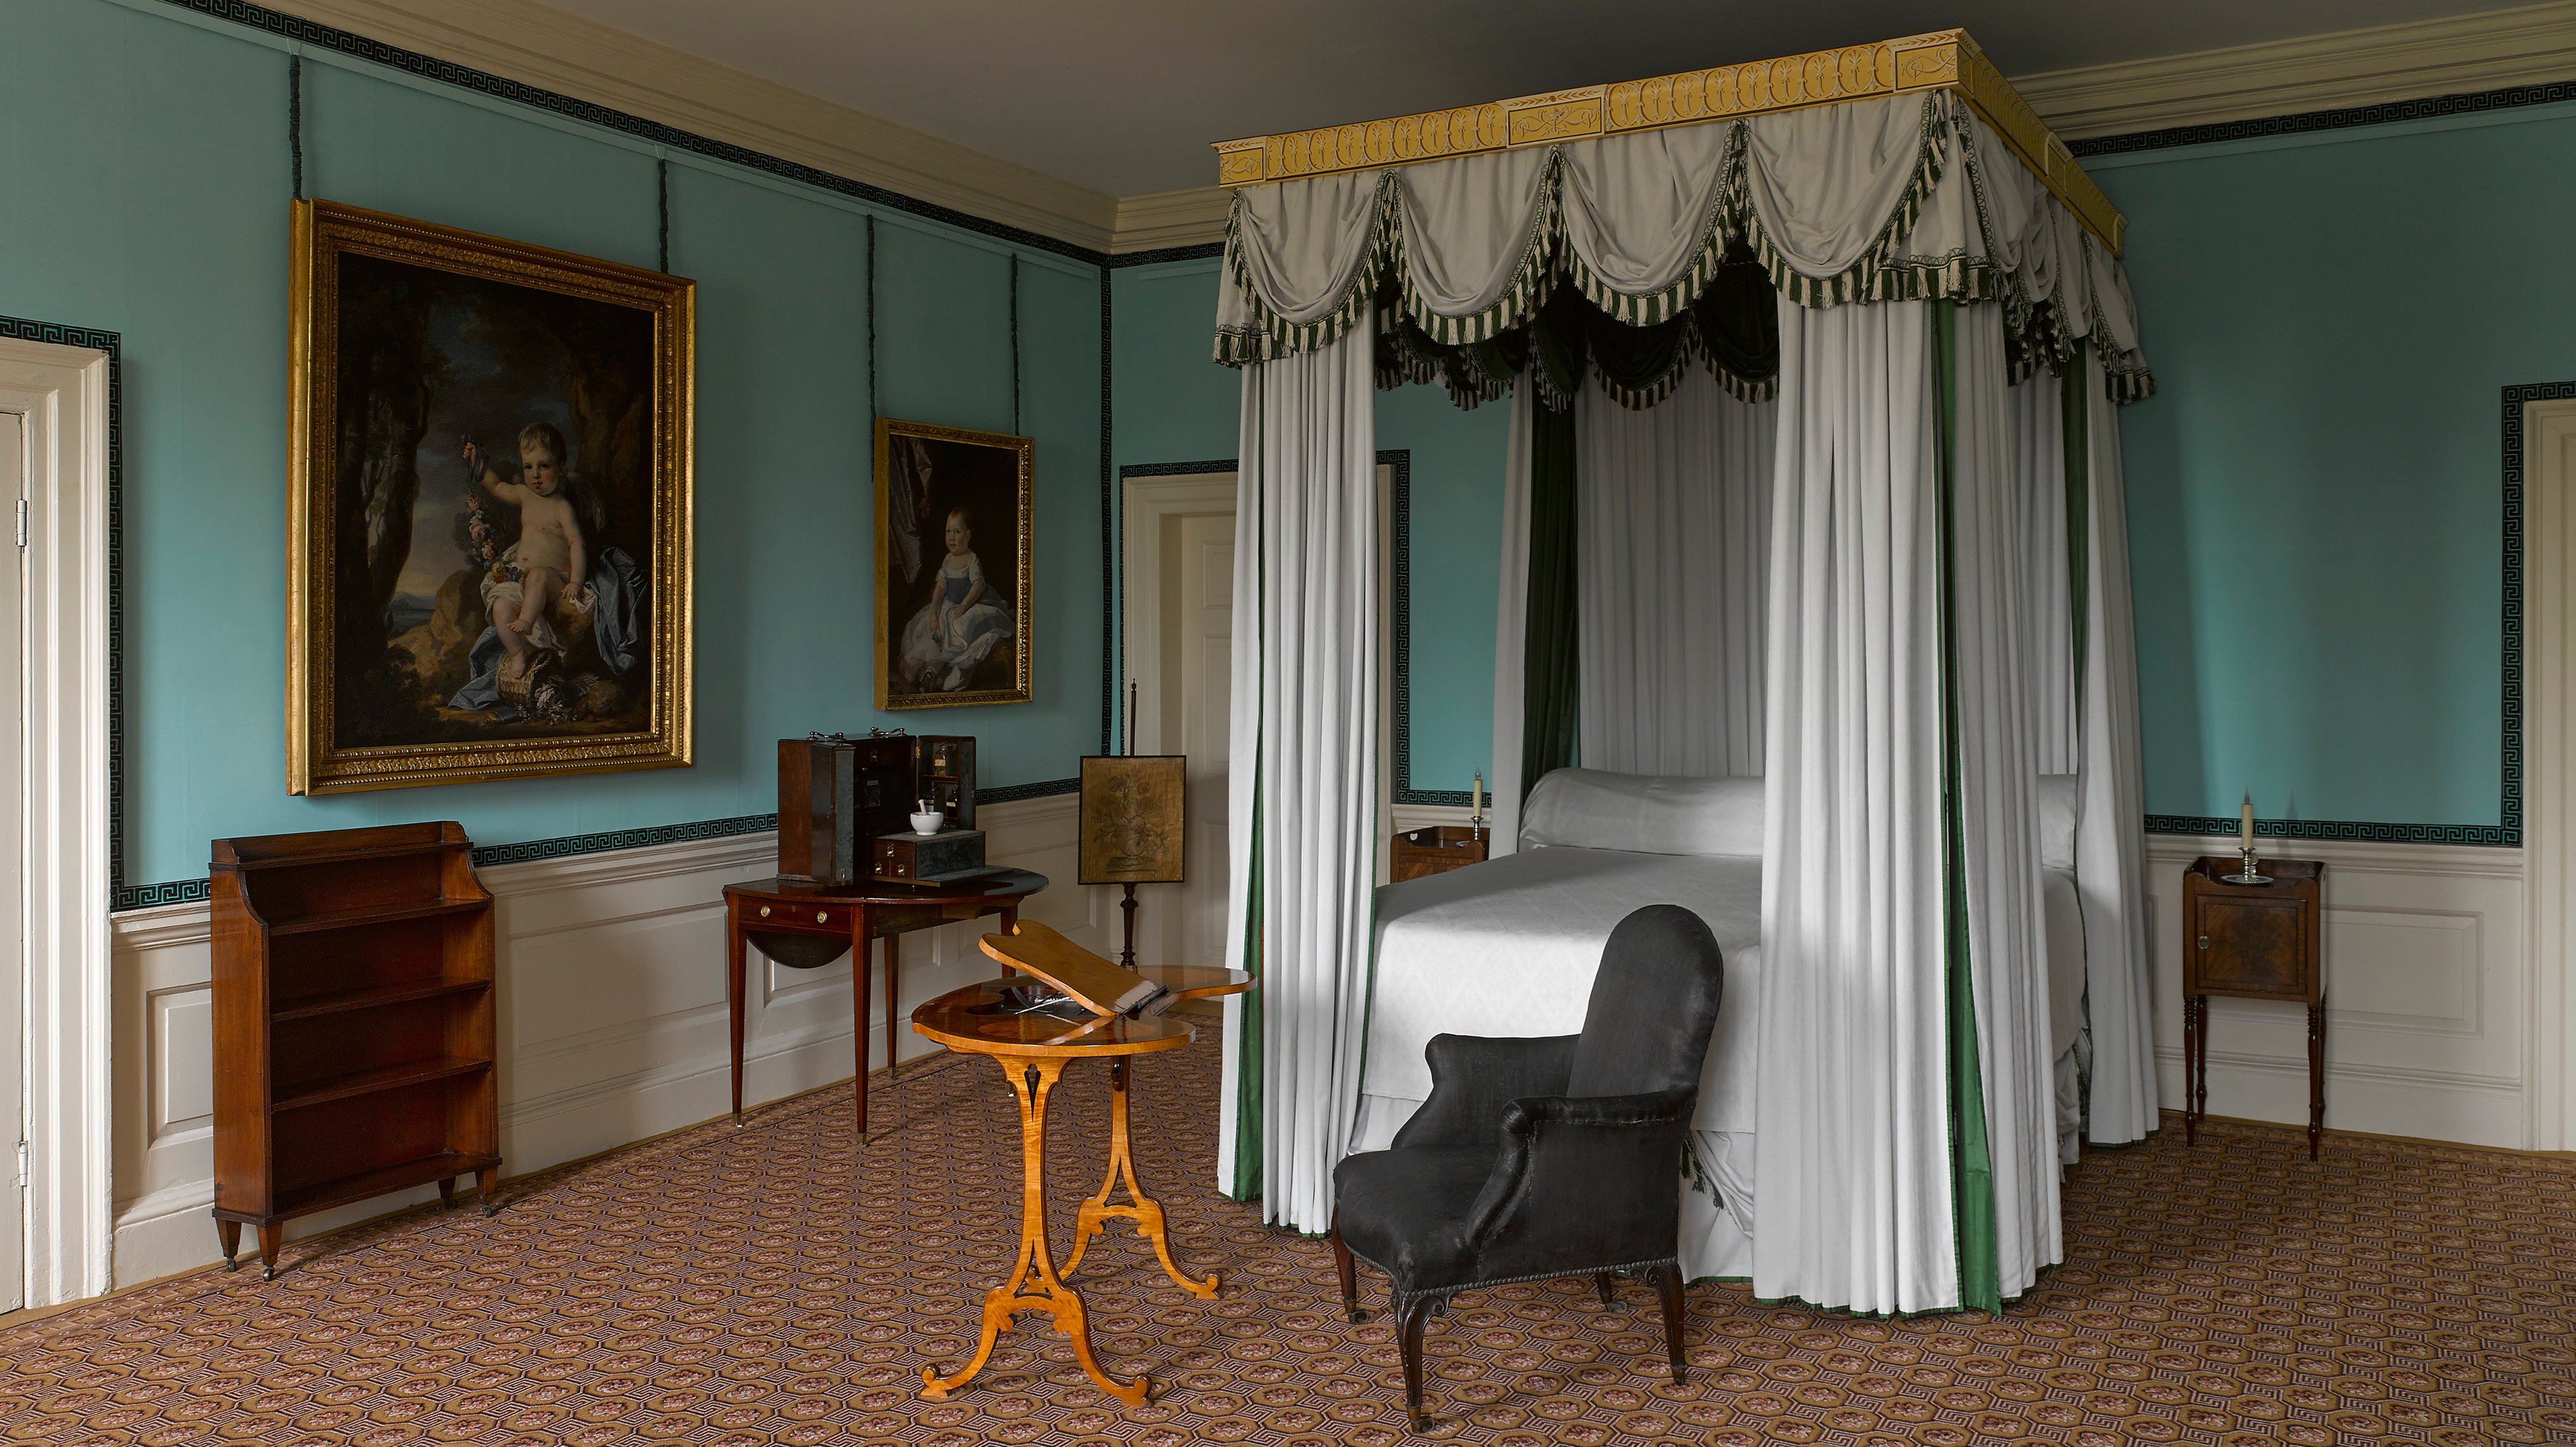 Antique bedroom featuring a curtained bed, gold-framed paintings and a black horsehair armchair in the foreground